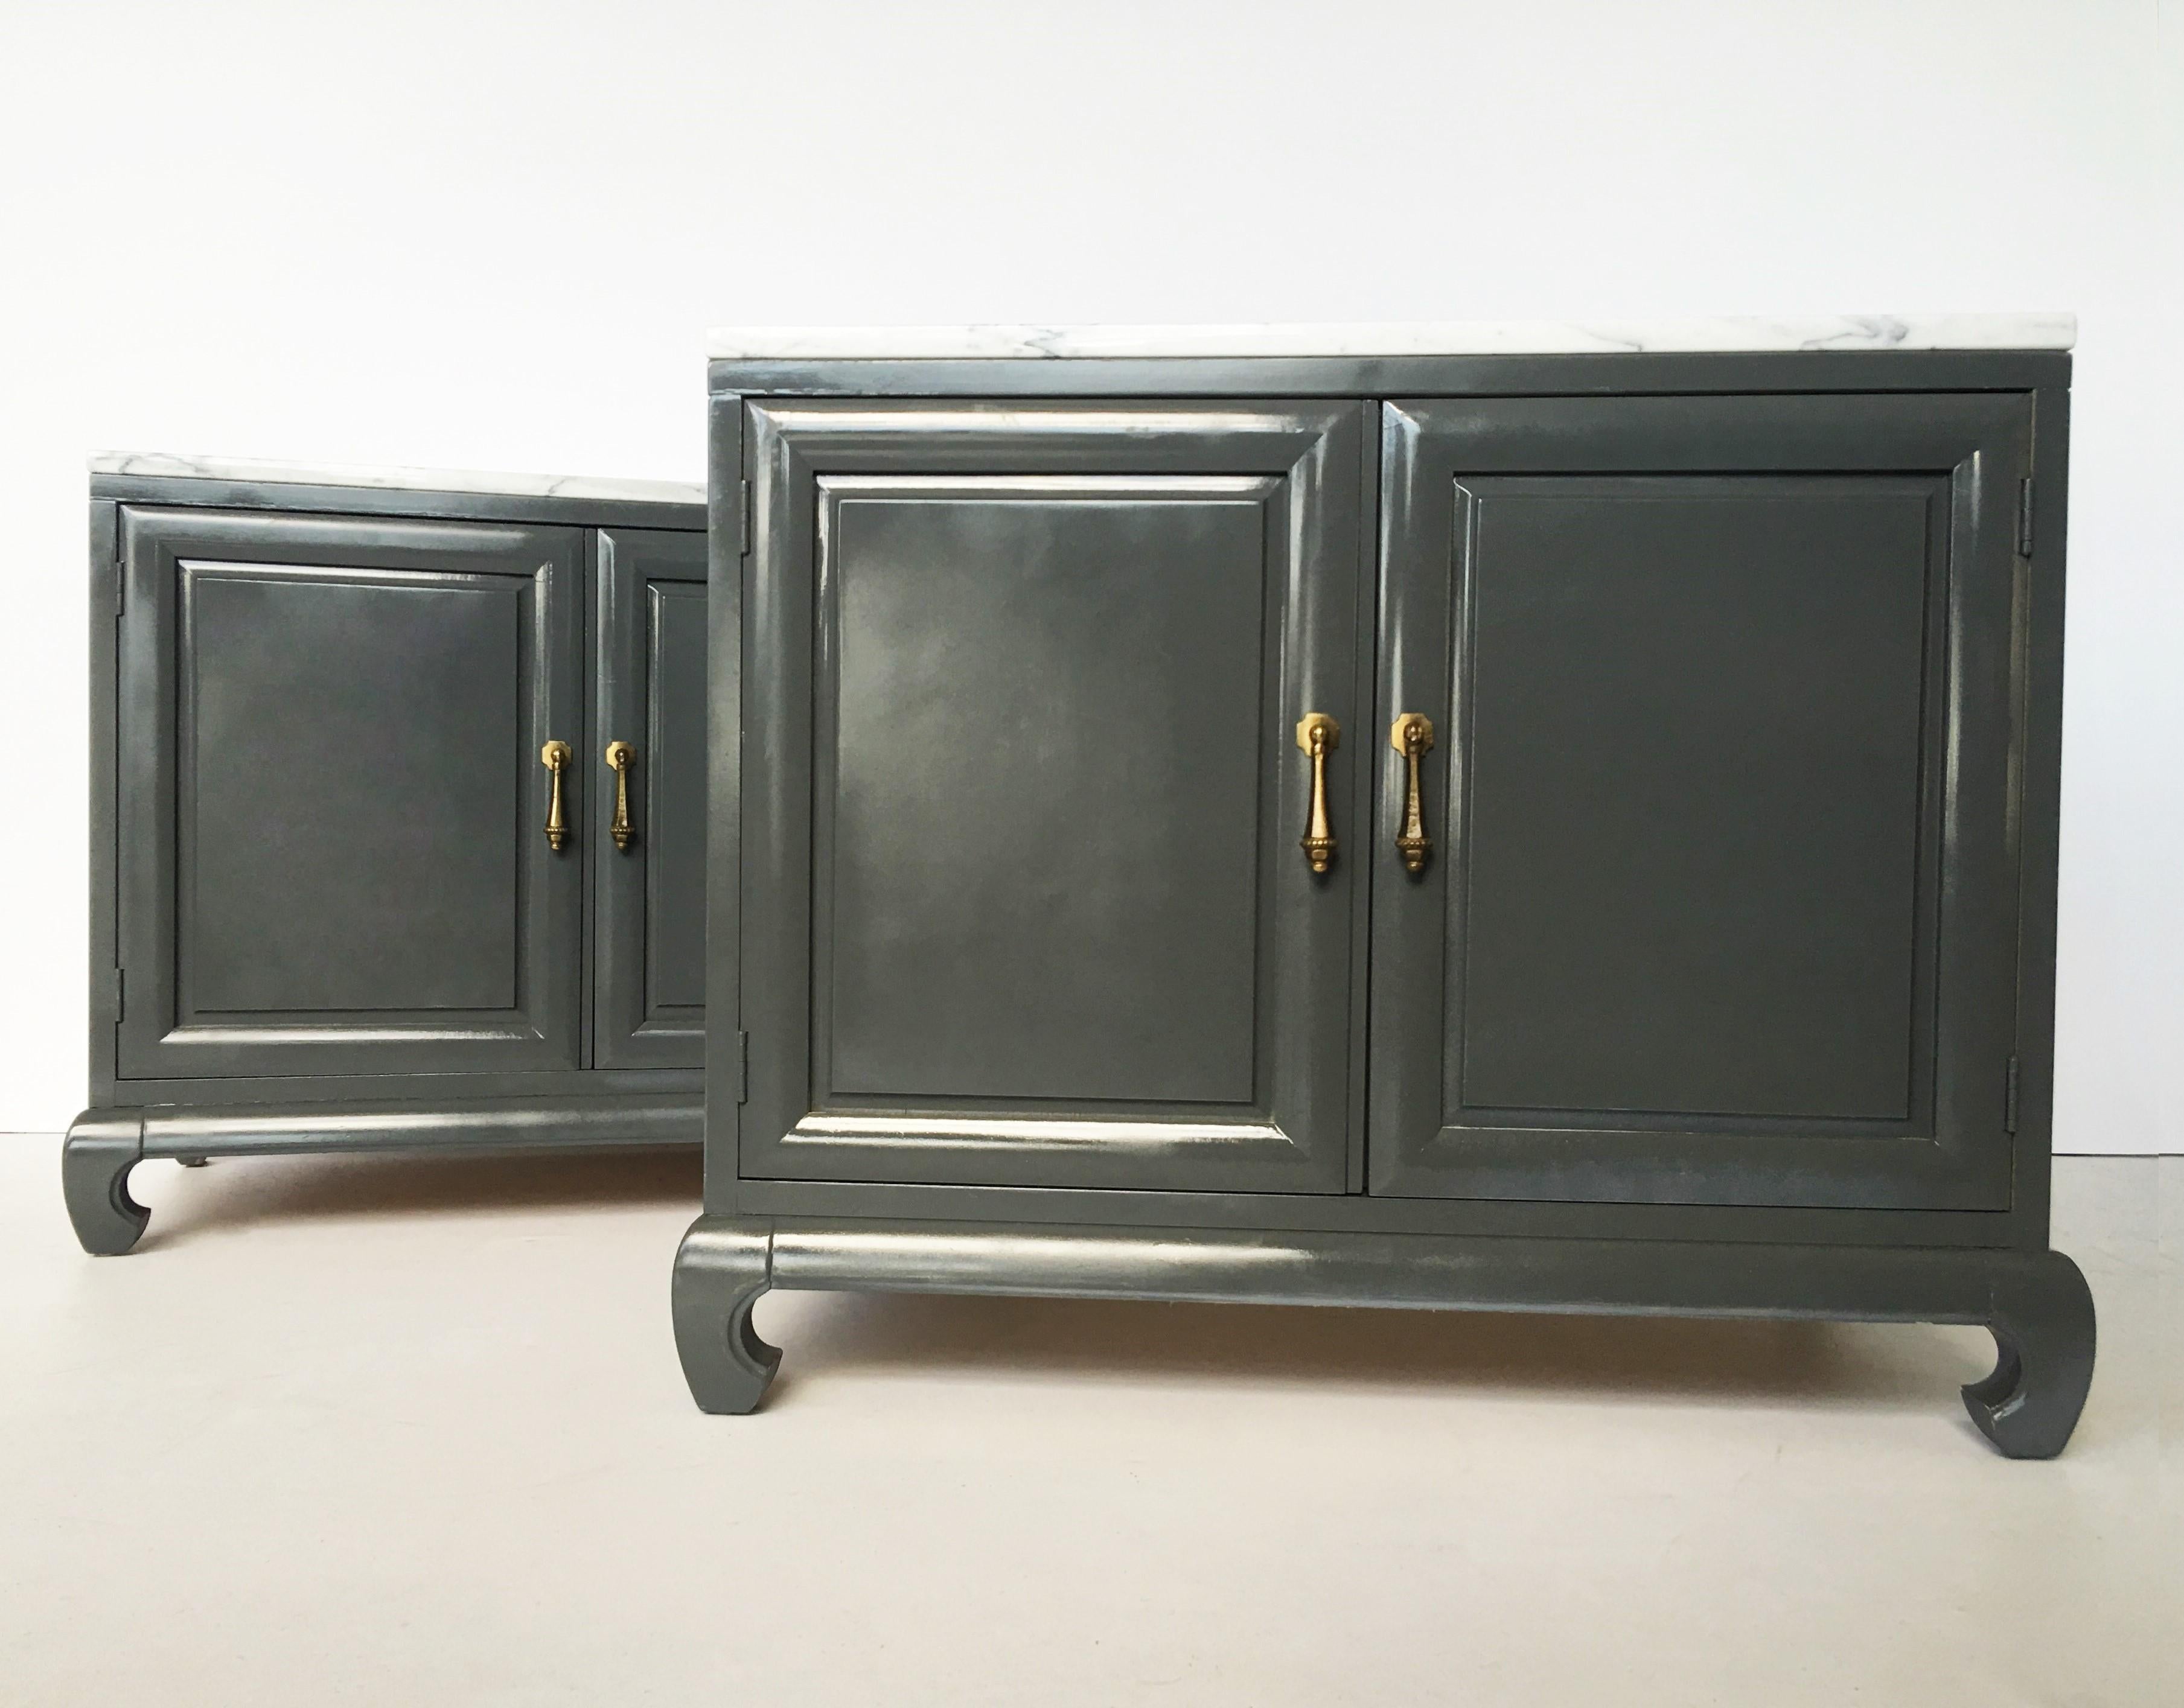 Pair of stunning James Mont style lacquer Asian Modern chinoiserie Ming nightstands. Made of wood and lacquered in a dark silver-gray tone with marble tops. Each cabinet has two doors in the front with original brass Asian pulls, Ming style turned